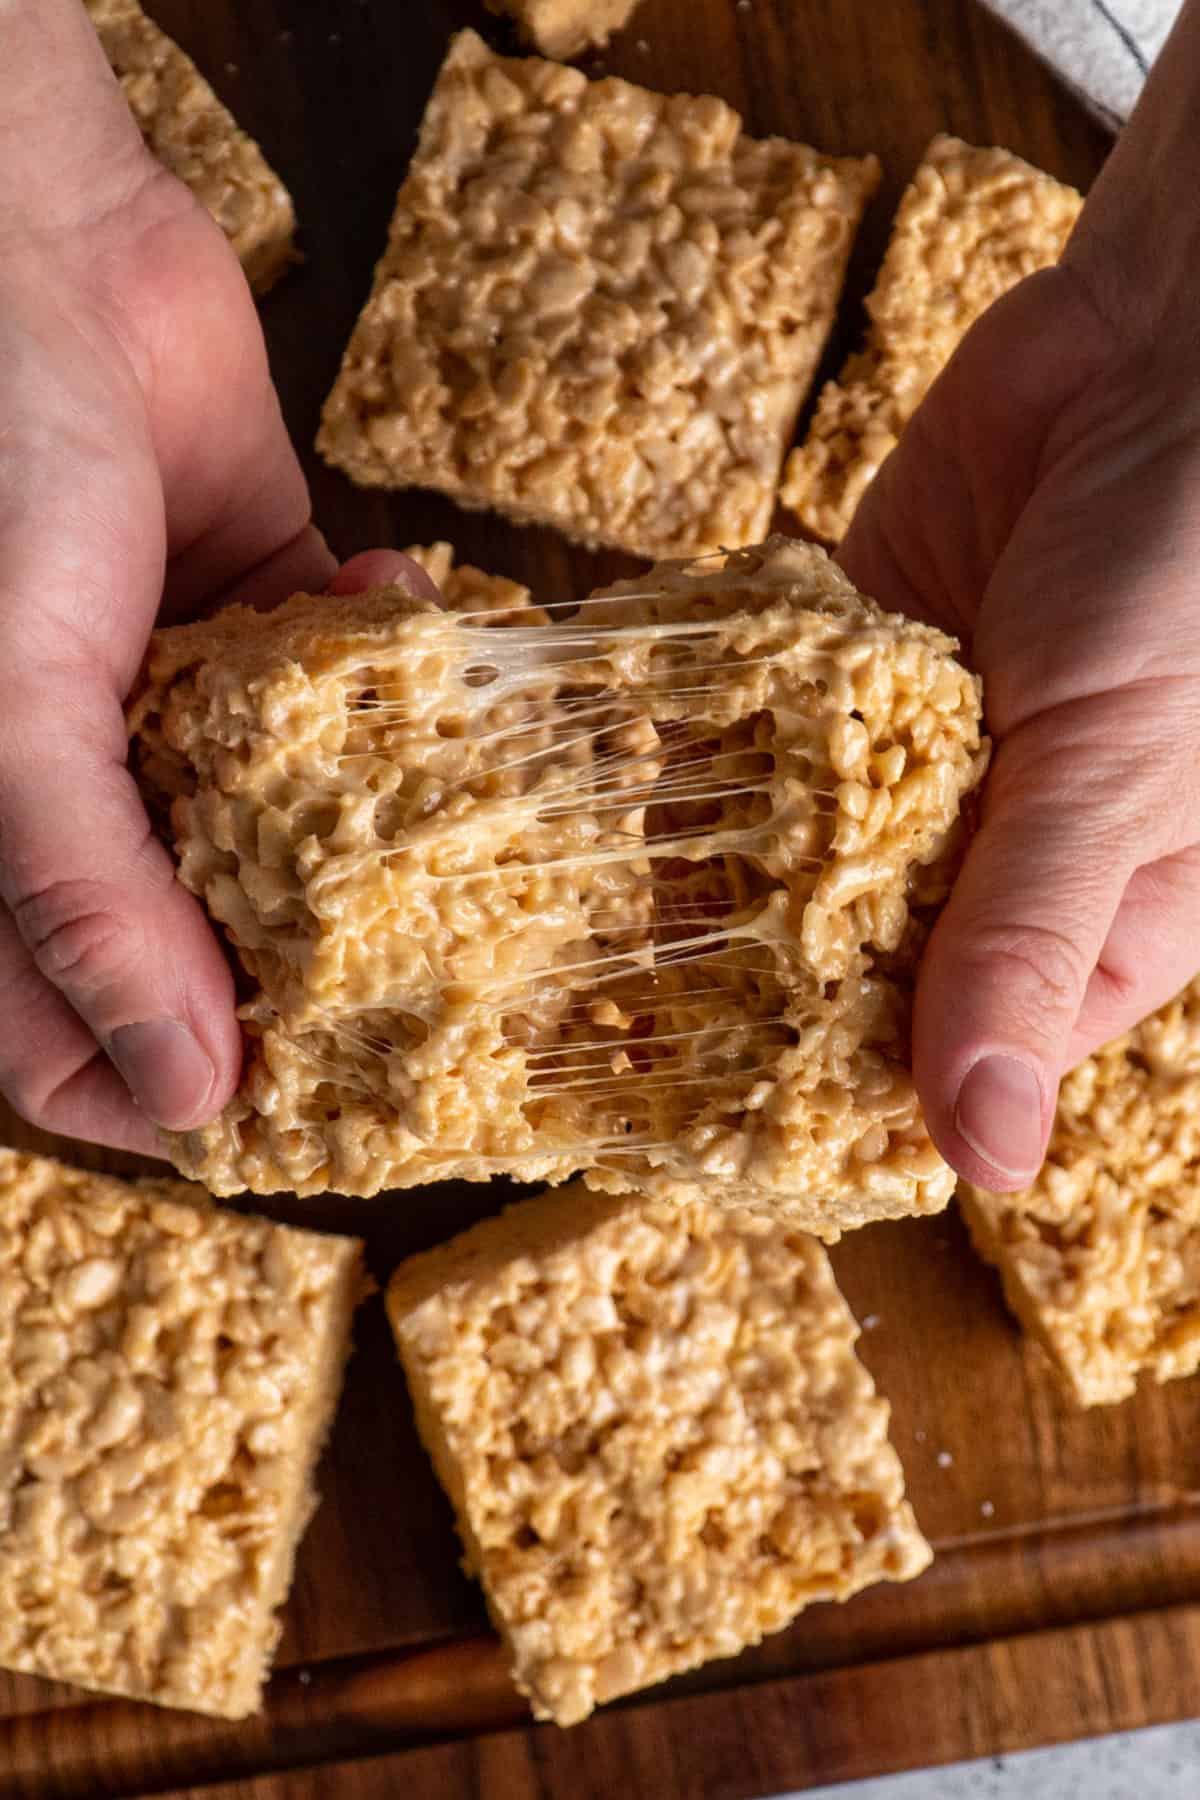 Two hands pulling apart salted caramel rice krispie treats.